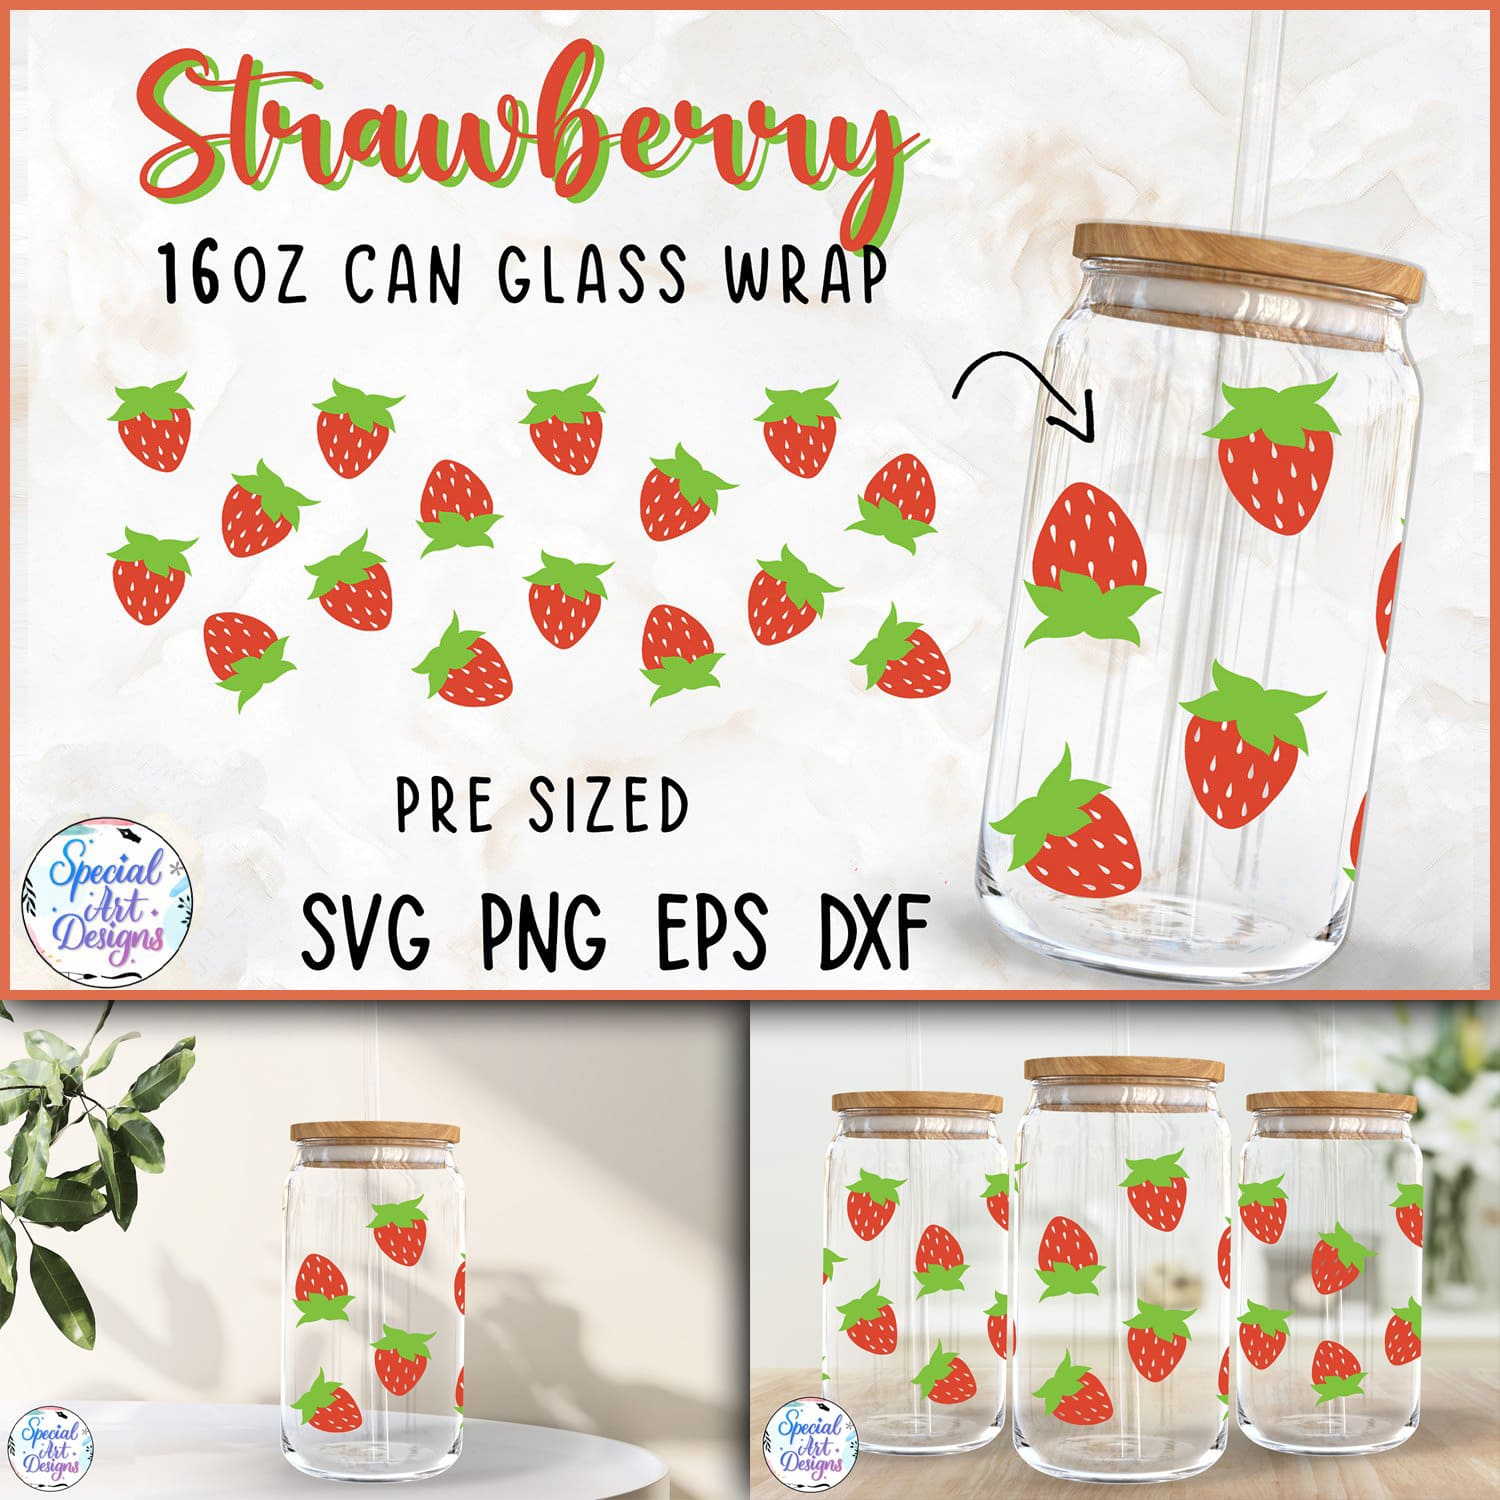 Strawberries | 16oz Libbey Glass Can Wrap Cut file cover.